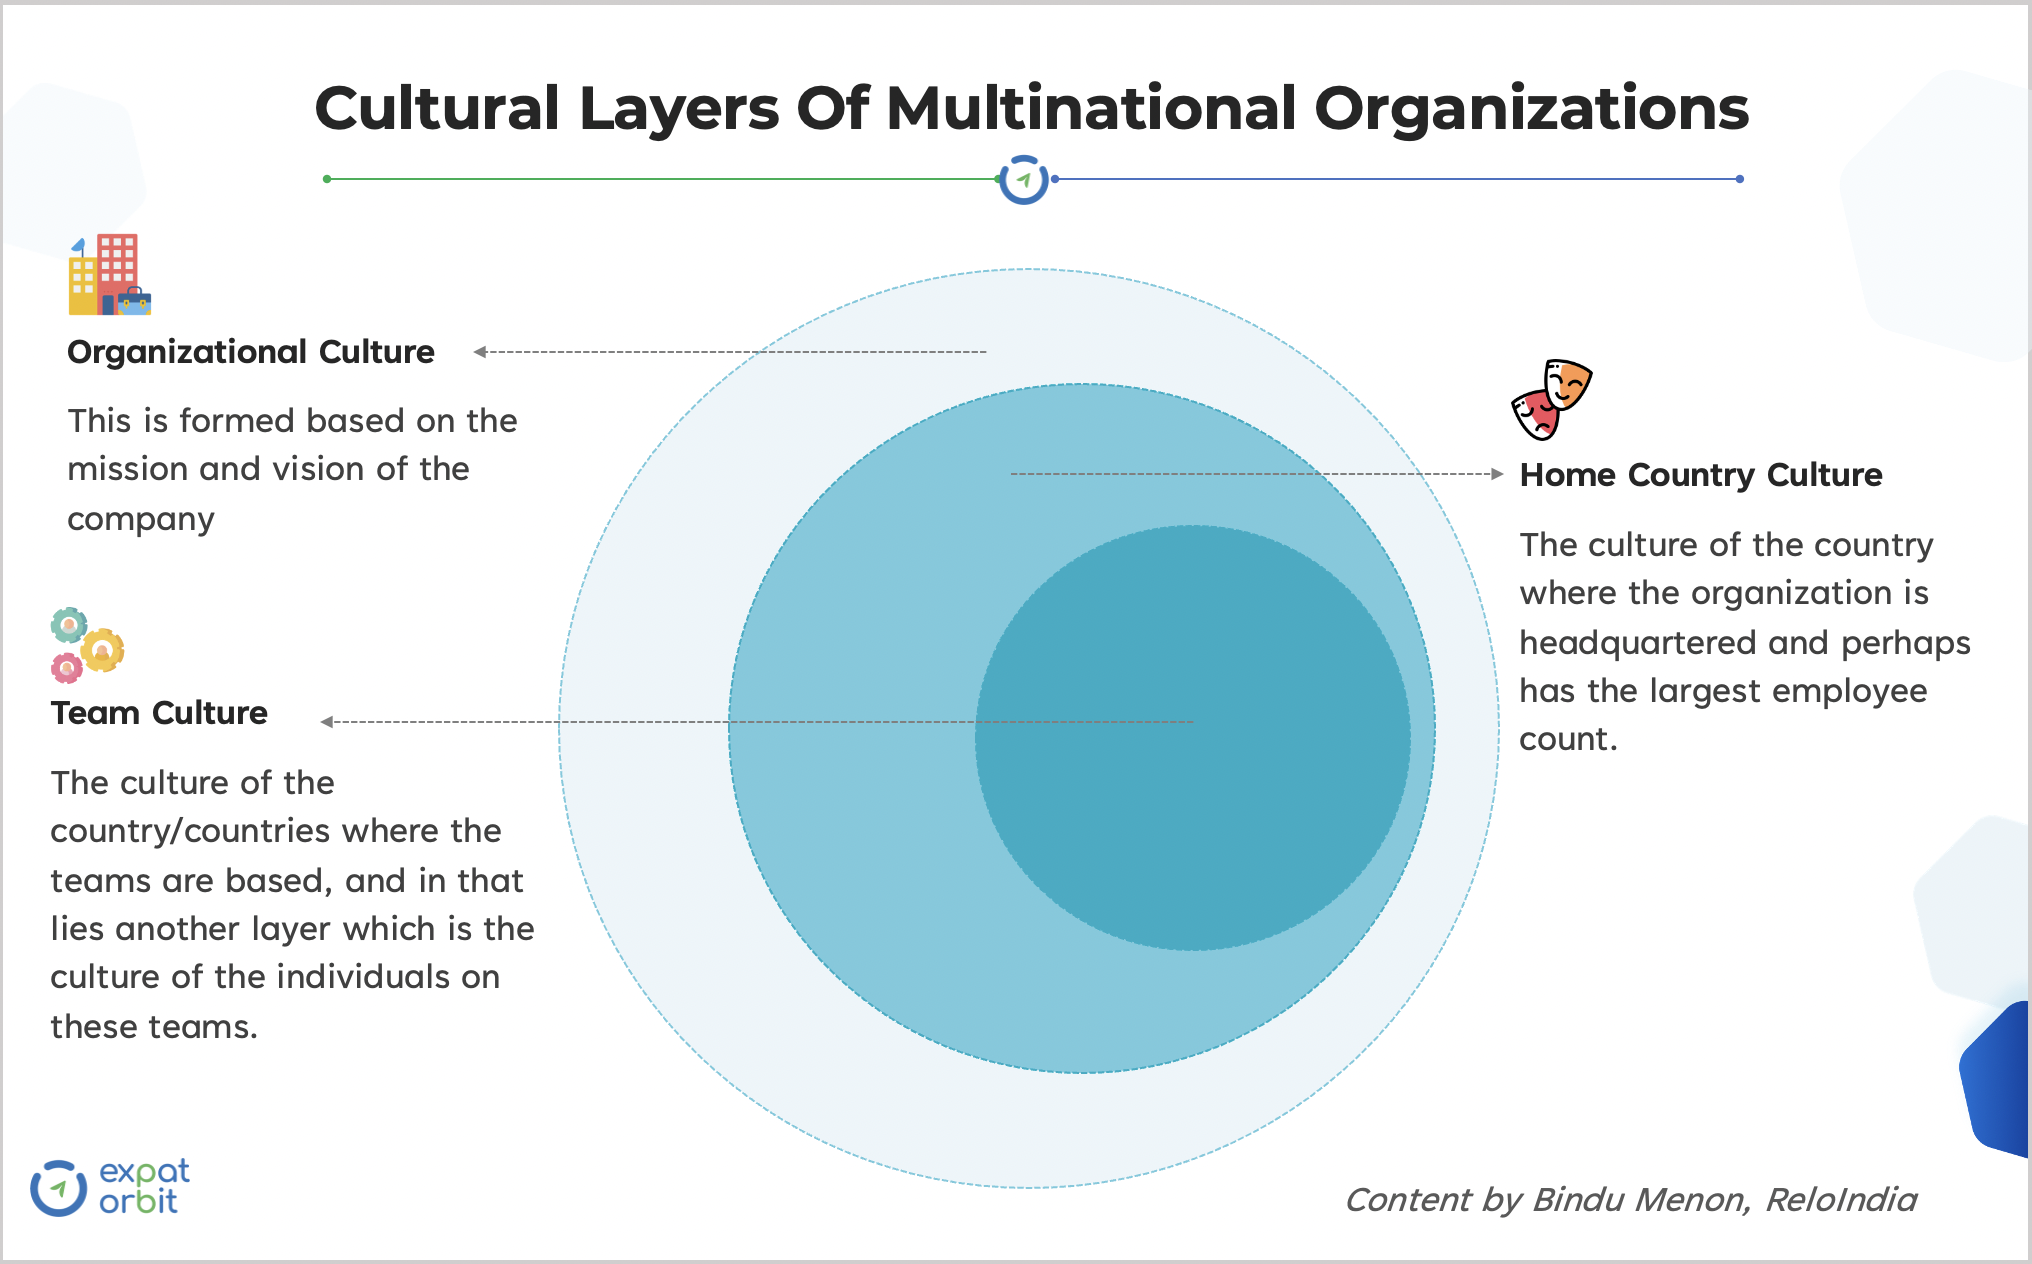 Cultural layers in MNCs